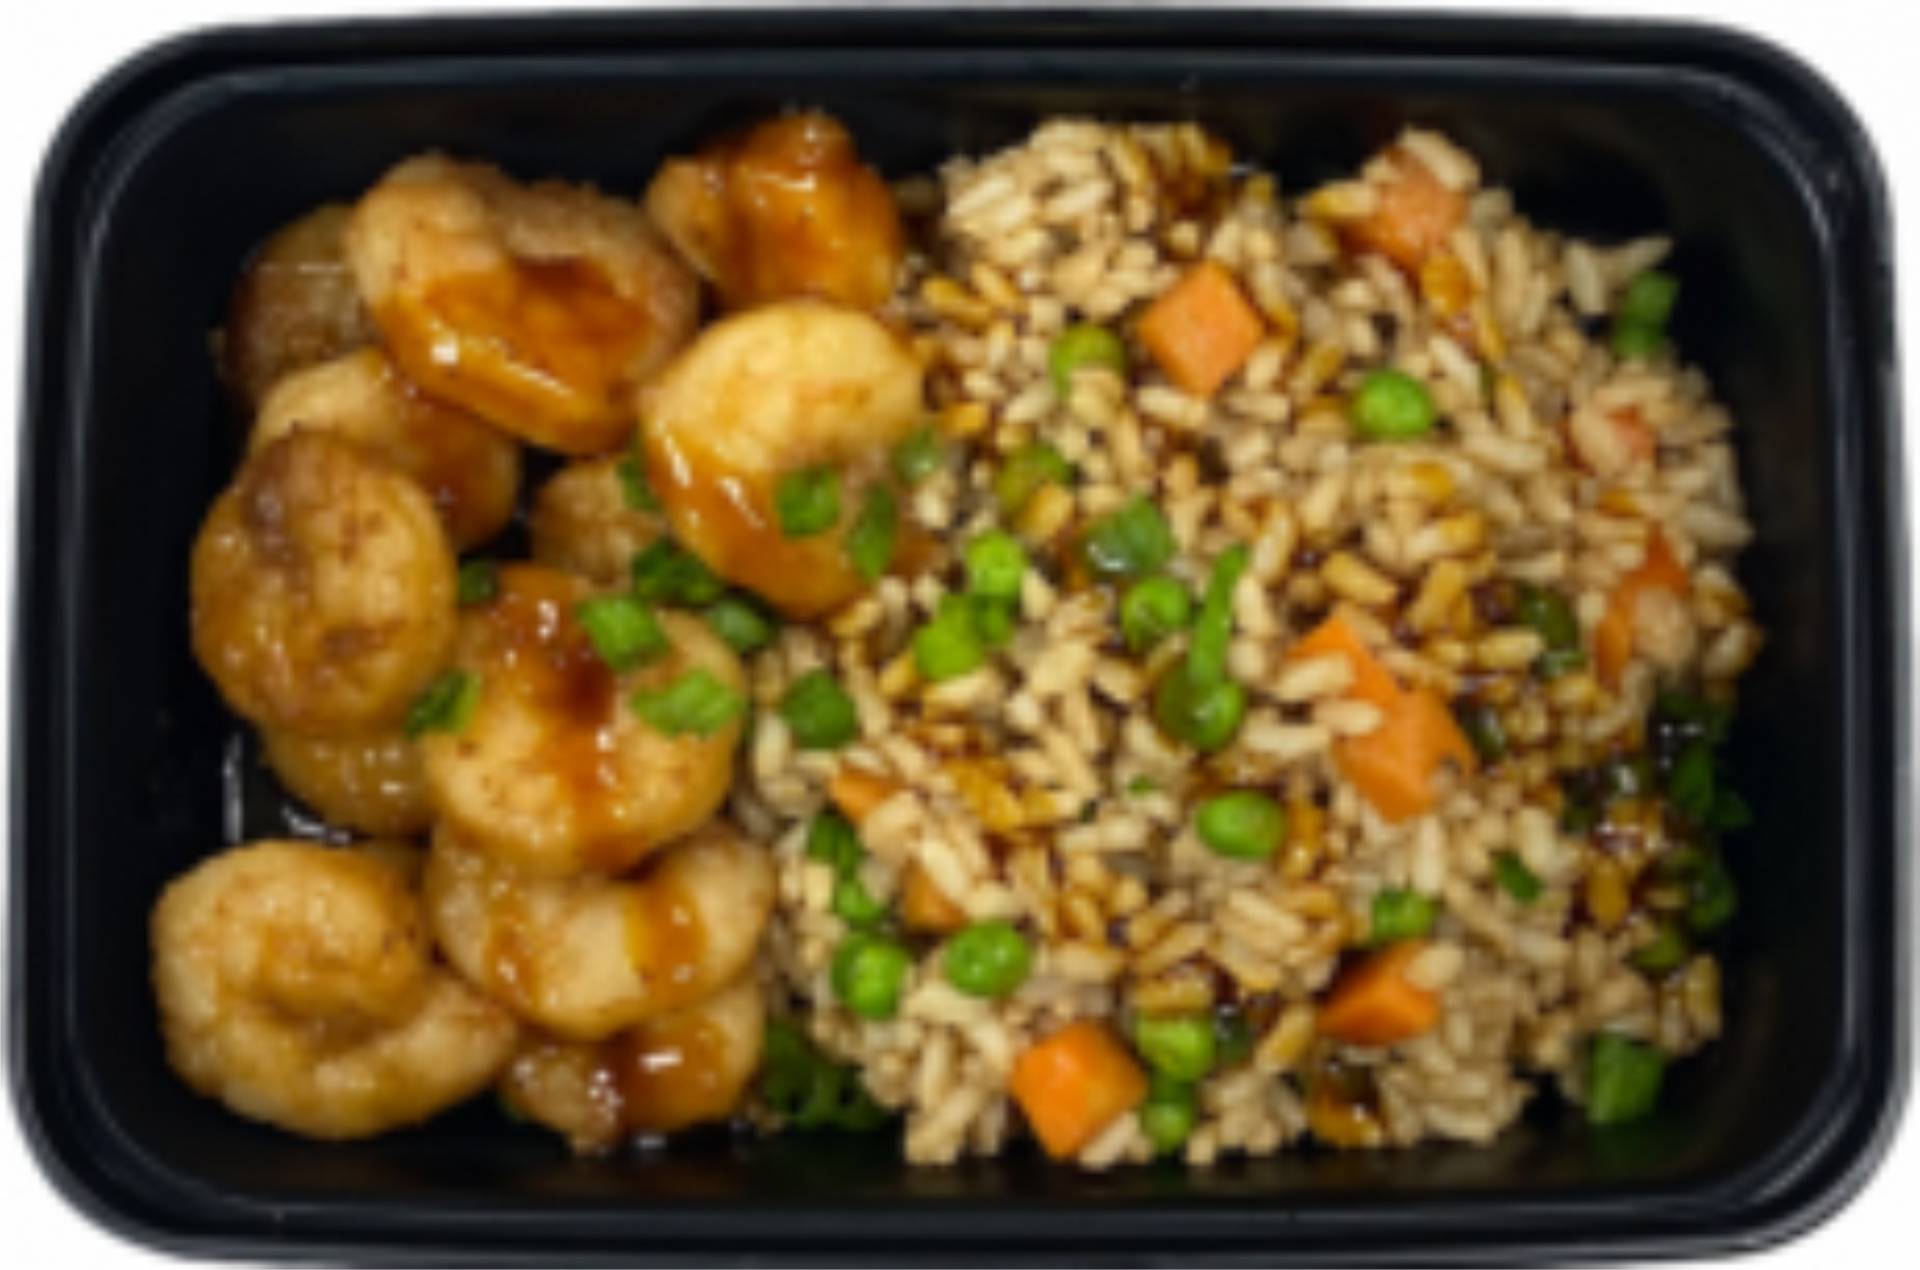 Spicy Shrimp & Vegetable Fried (Brown) Rice